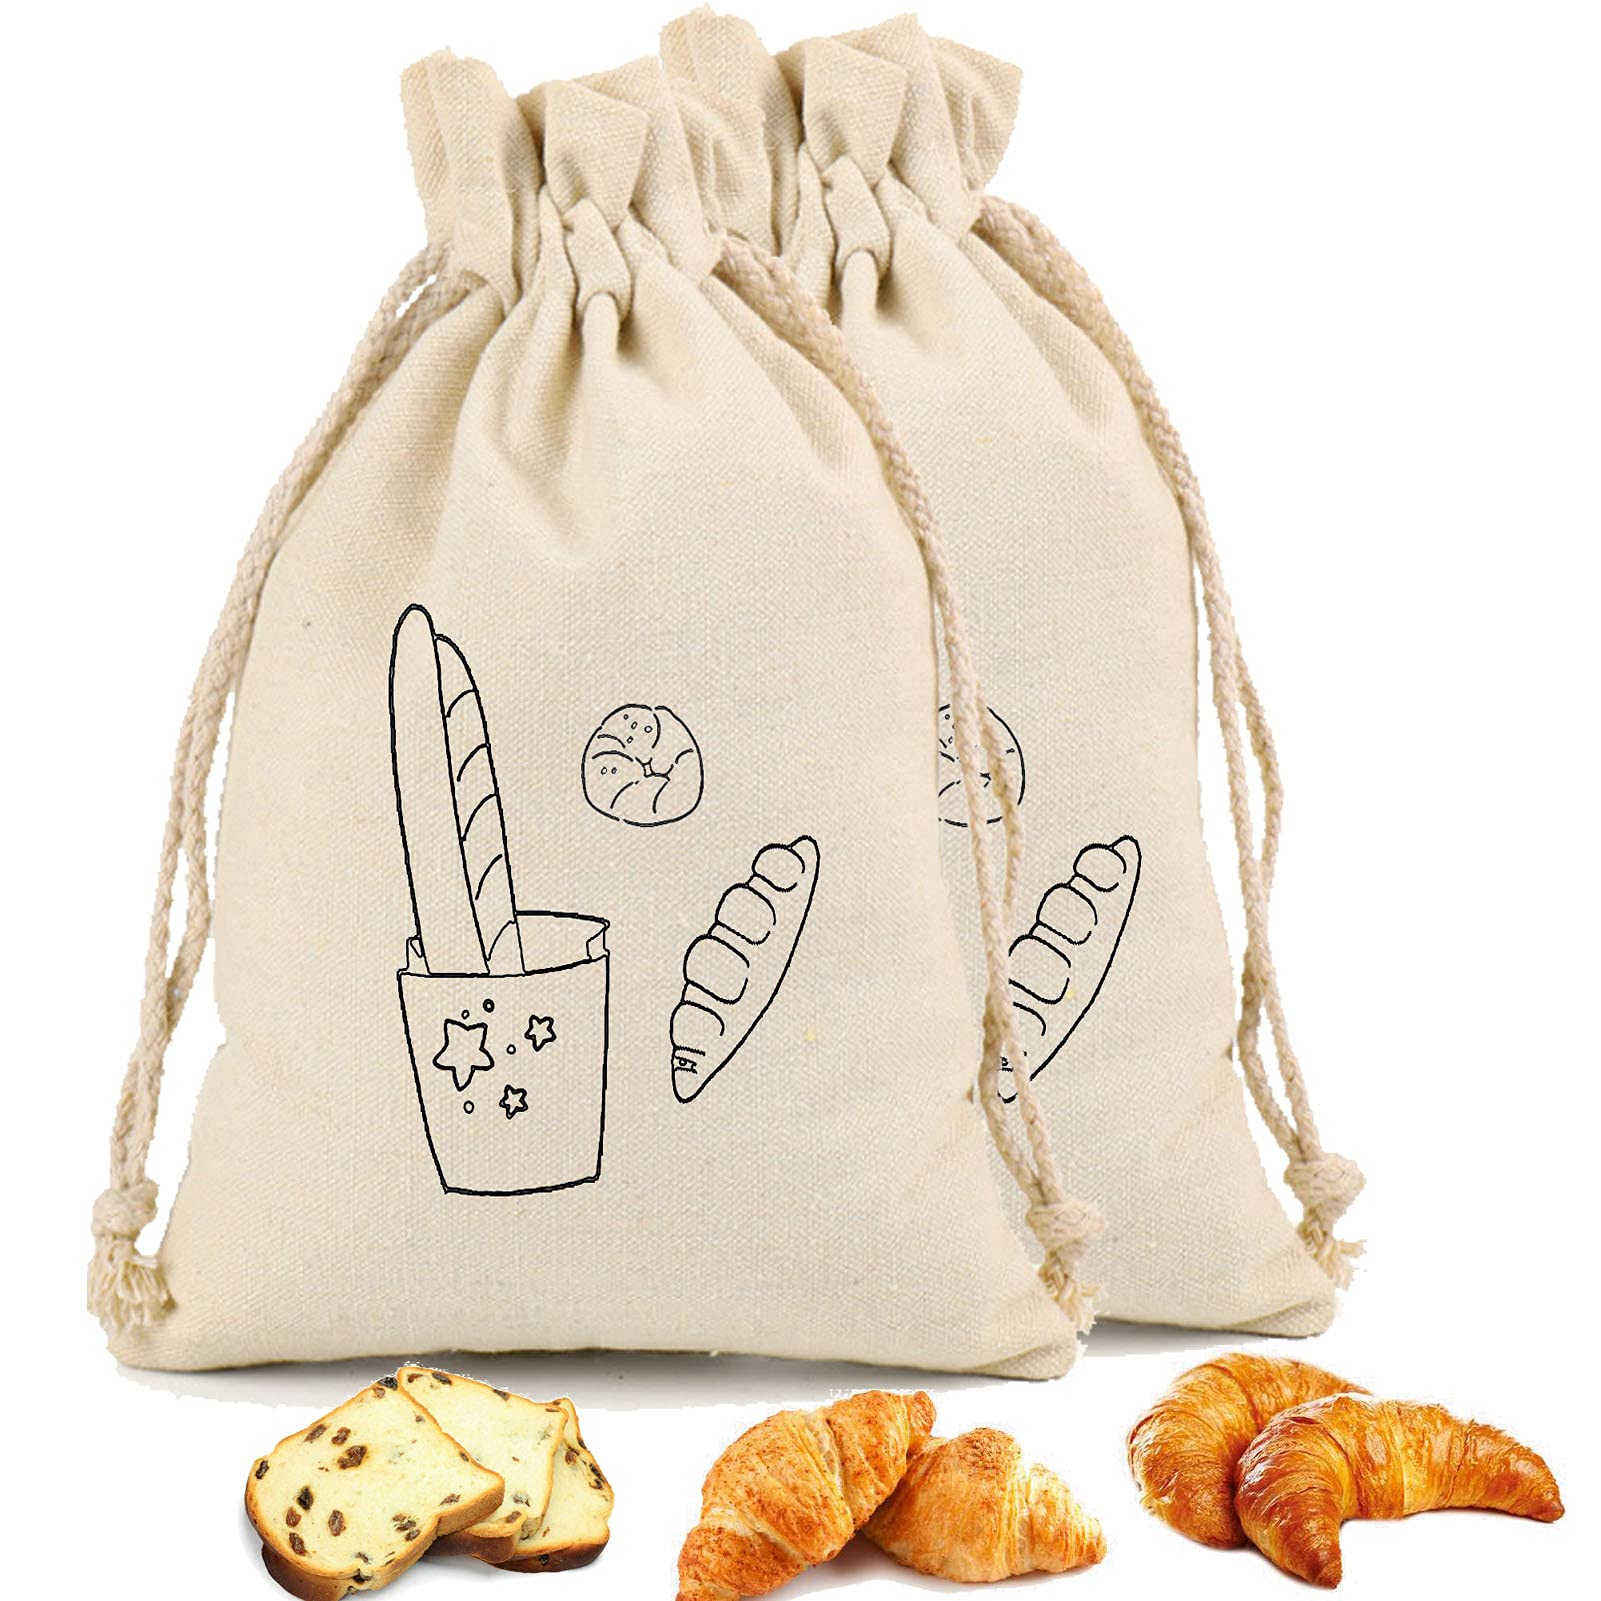 Bread Bags Homemade Reusable Food Storage containers Artisan Bread Bags Rice Grain Natural Cloth Bags